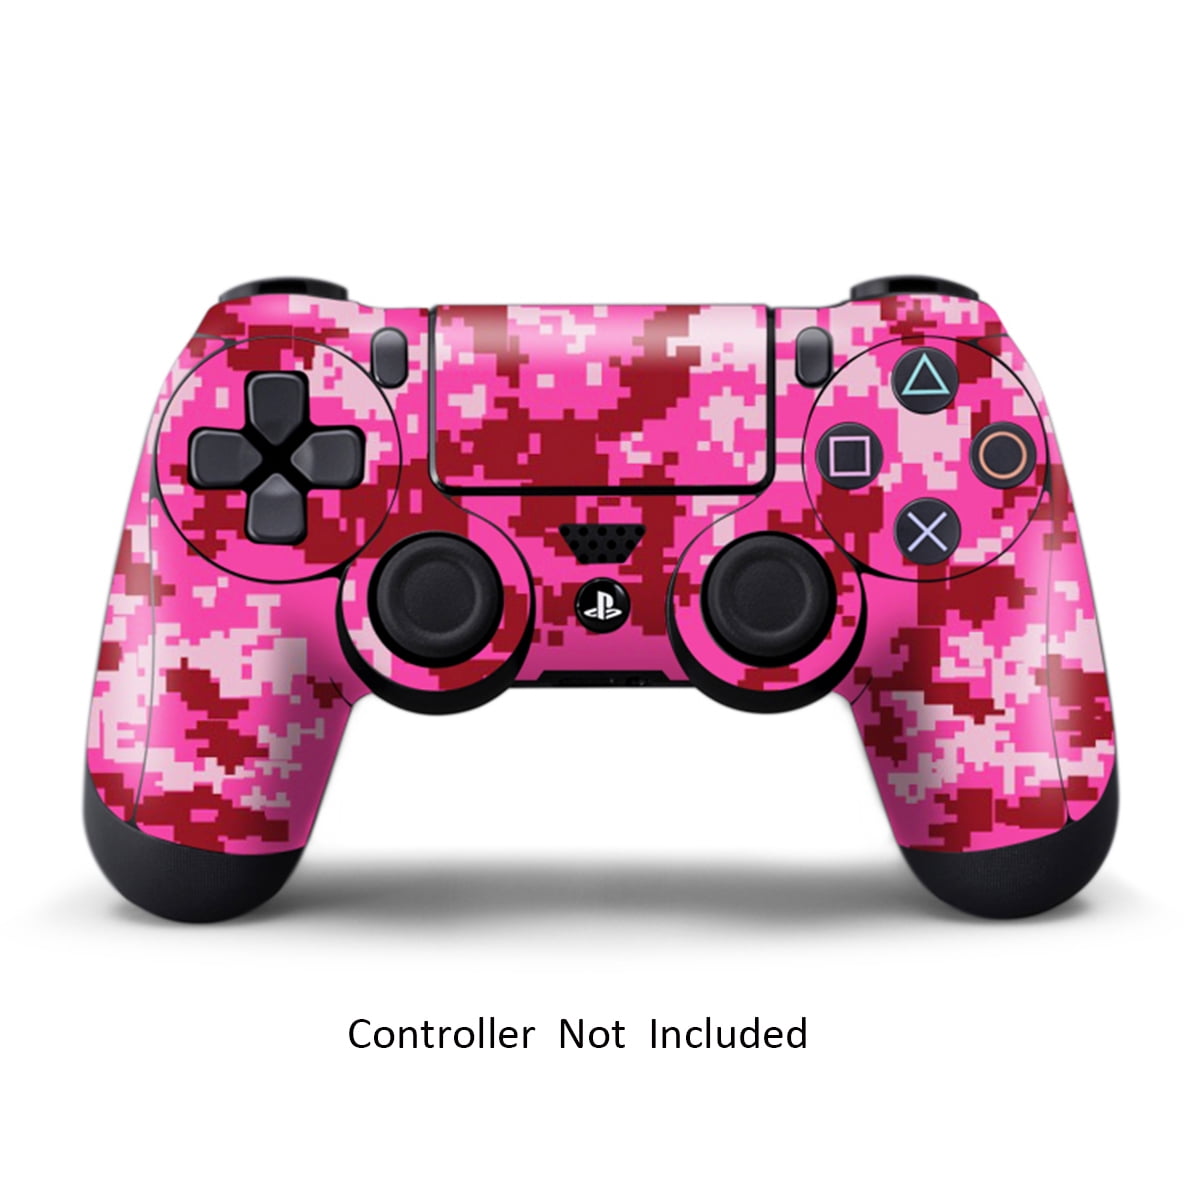  Decal Skin for Ps4 Pro, Whole Body Vinyl Sticker Cover for  Playstation 4 Pro Console and Controller (Include 4pcs Light Bar Stickers)( PS4 Pro, Pink Sky) : Video Games